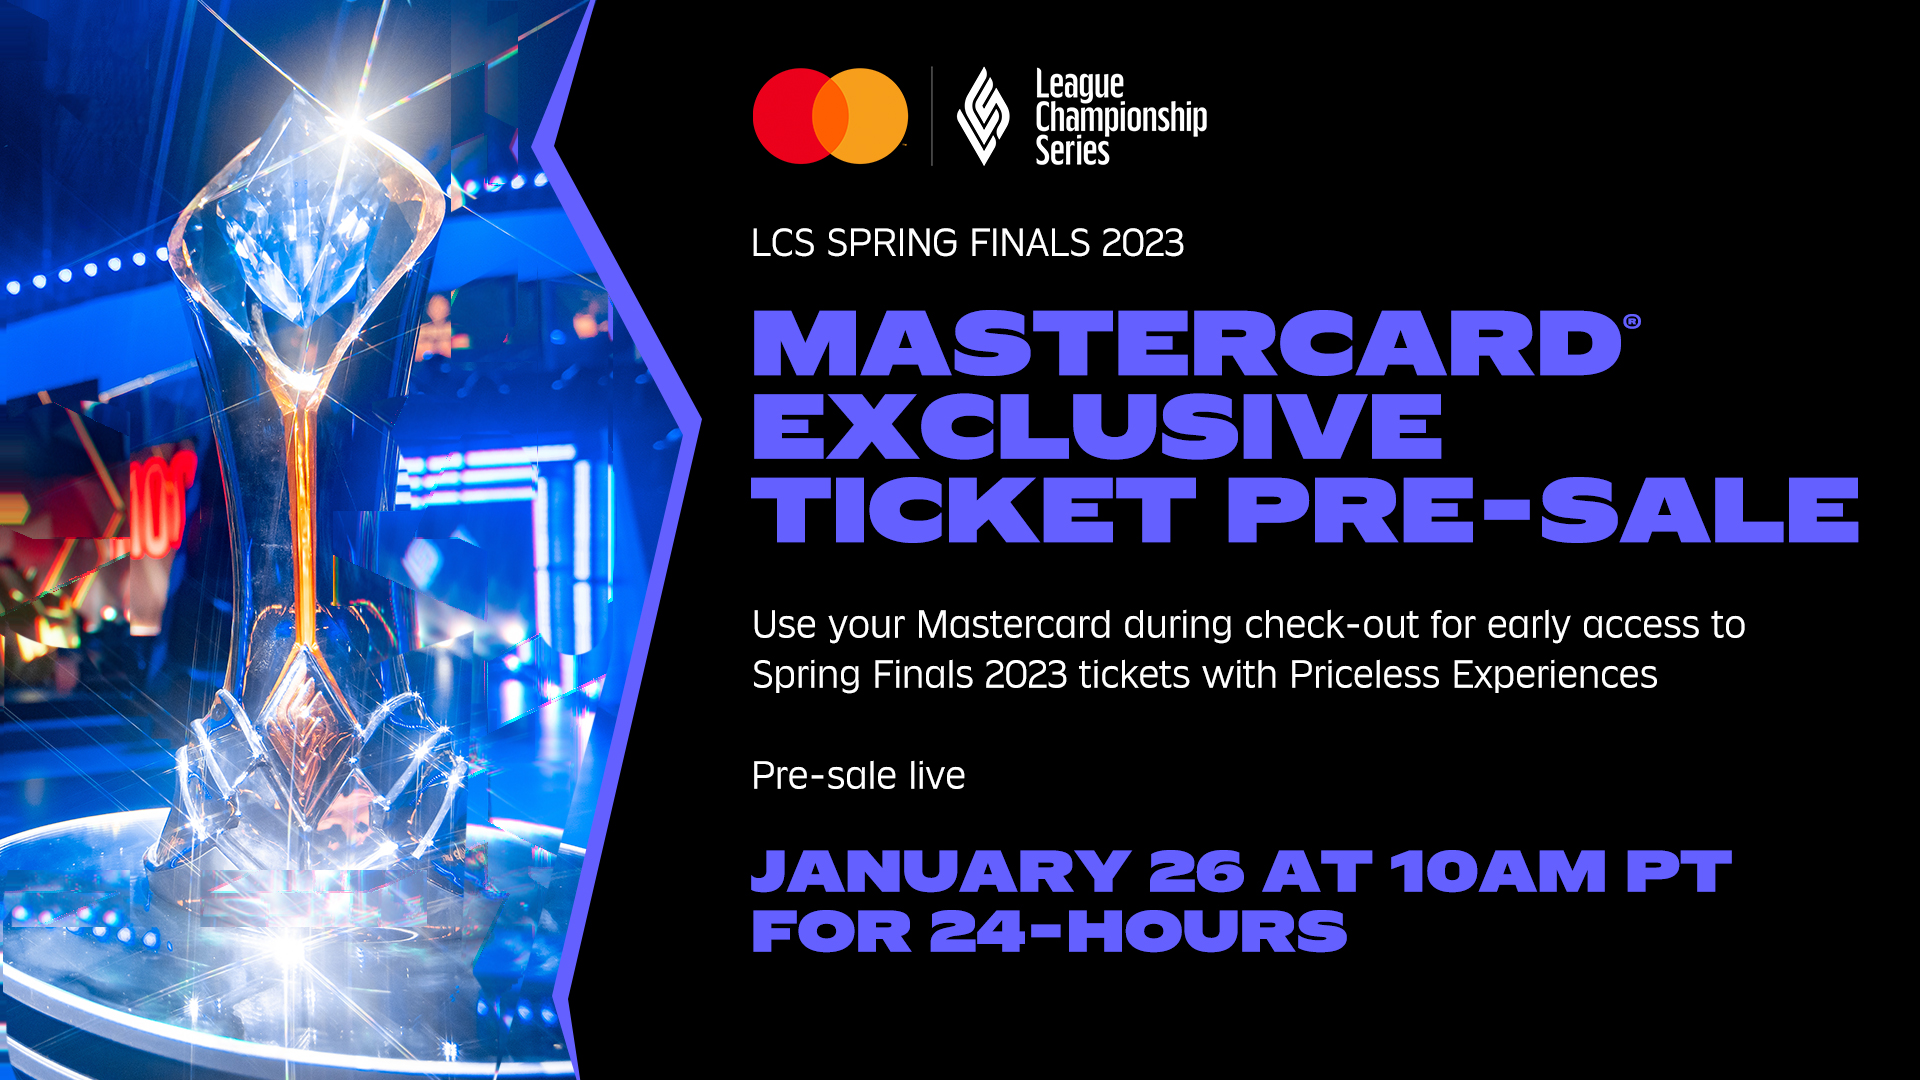 LCS on Twitter "The 2023 LCS Spring Finals ticket PreSale for